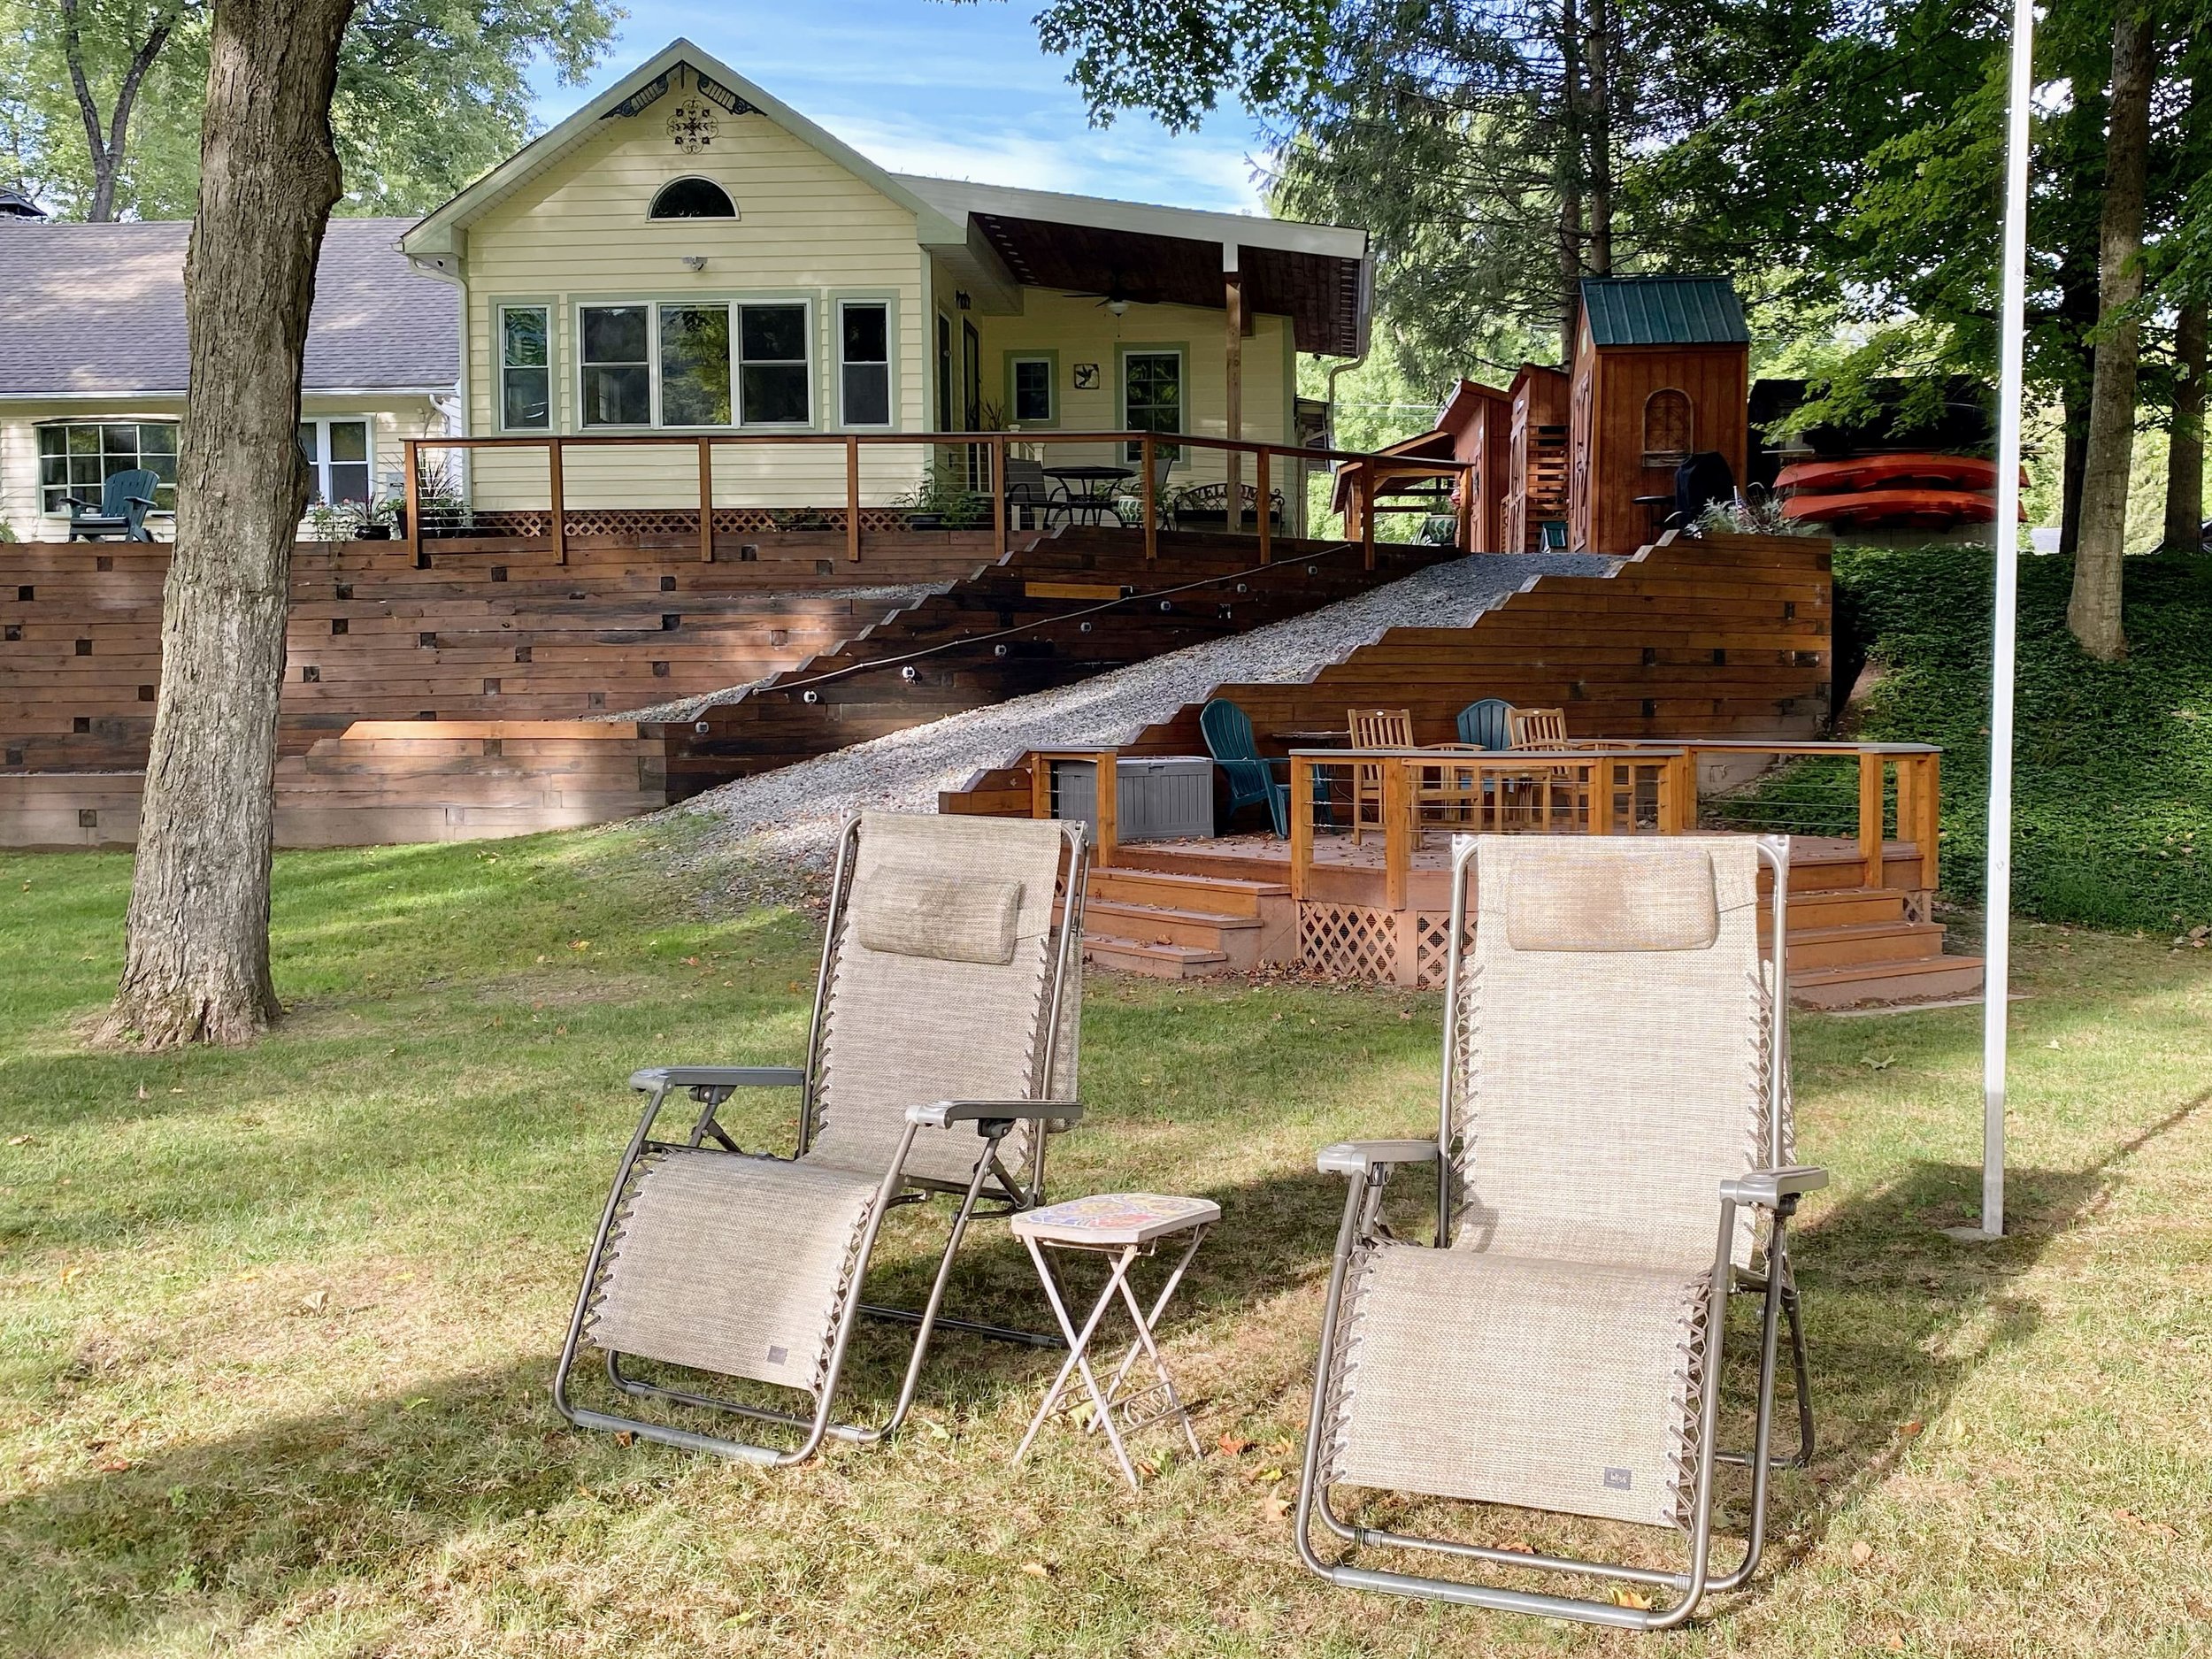 Outdoor Chairs_Mission Possible Airbnb_Narrowsburg NY.jpg